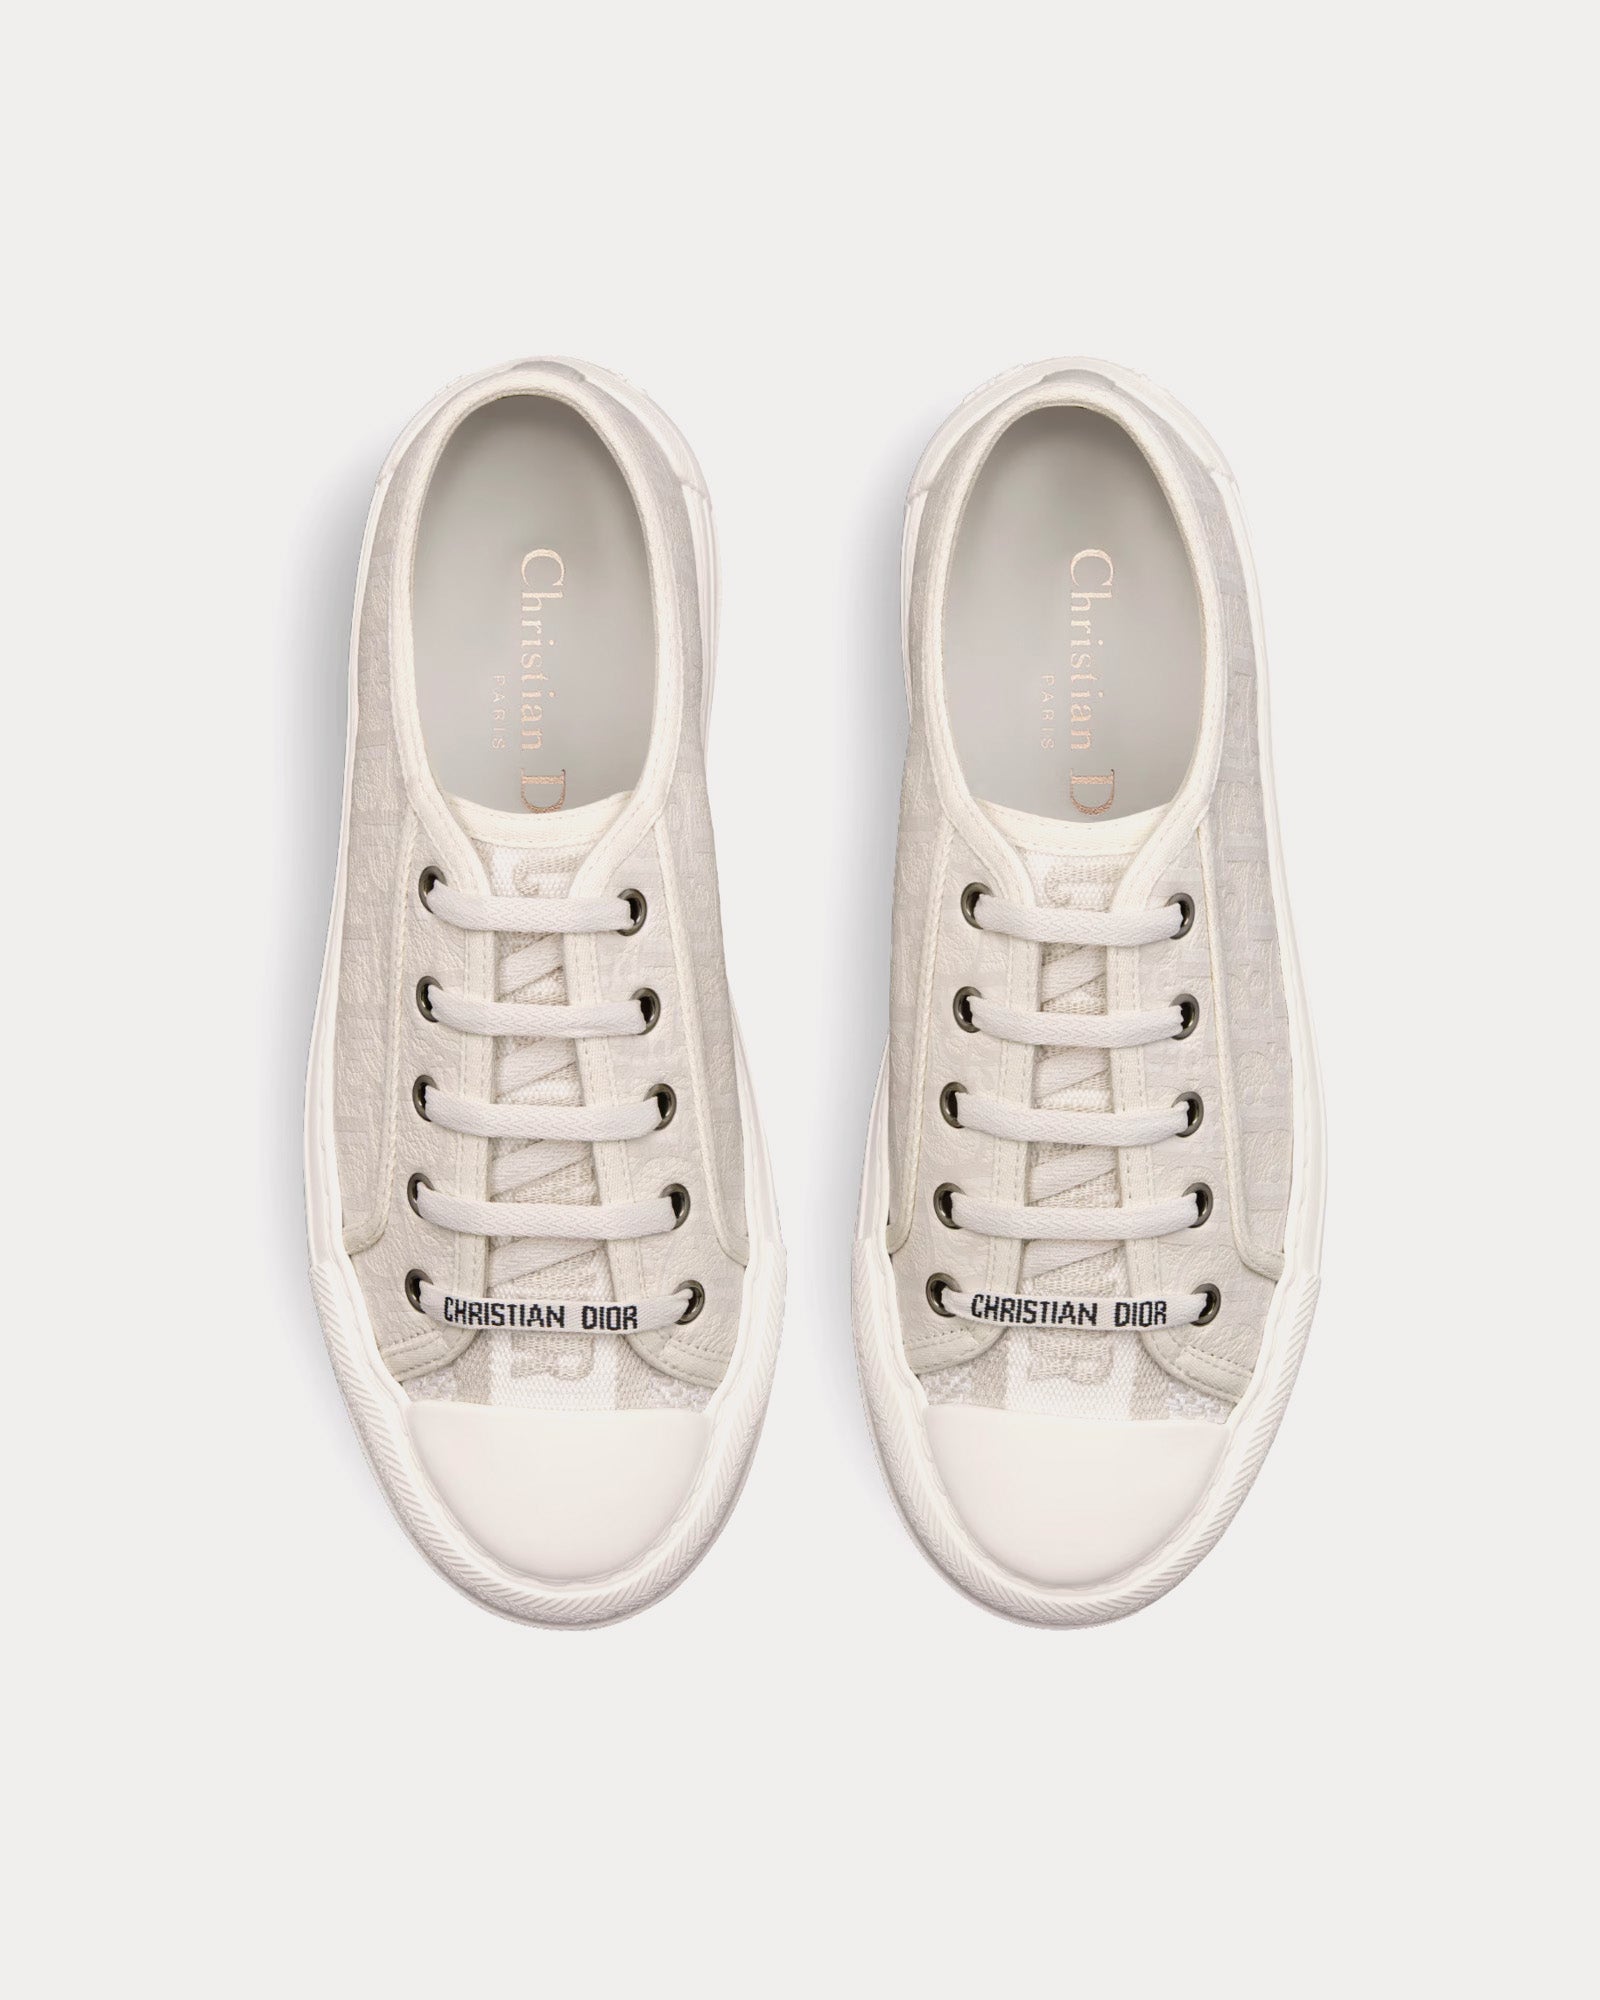 Dior - Walk'n'Dior Platform White Calfskin Textured with Dior Oblique Motif and Embroidered Cotton Low Top Sneakers